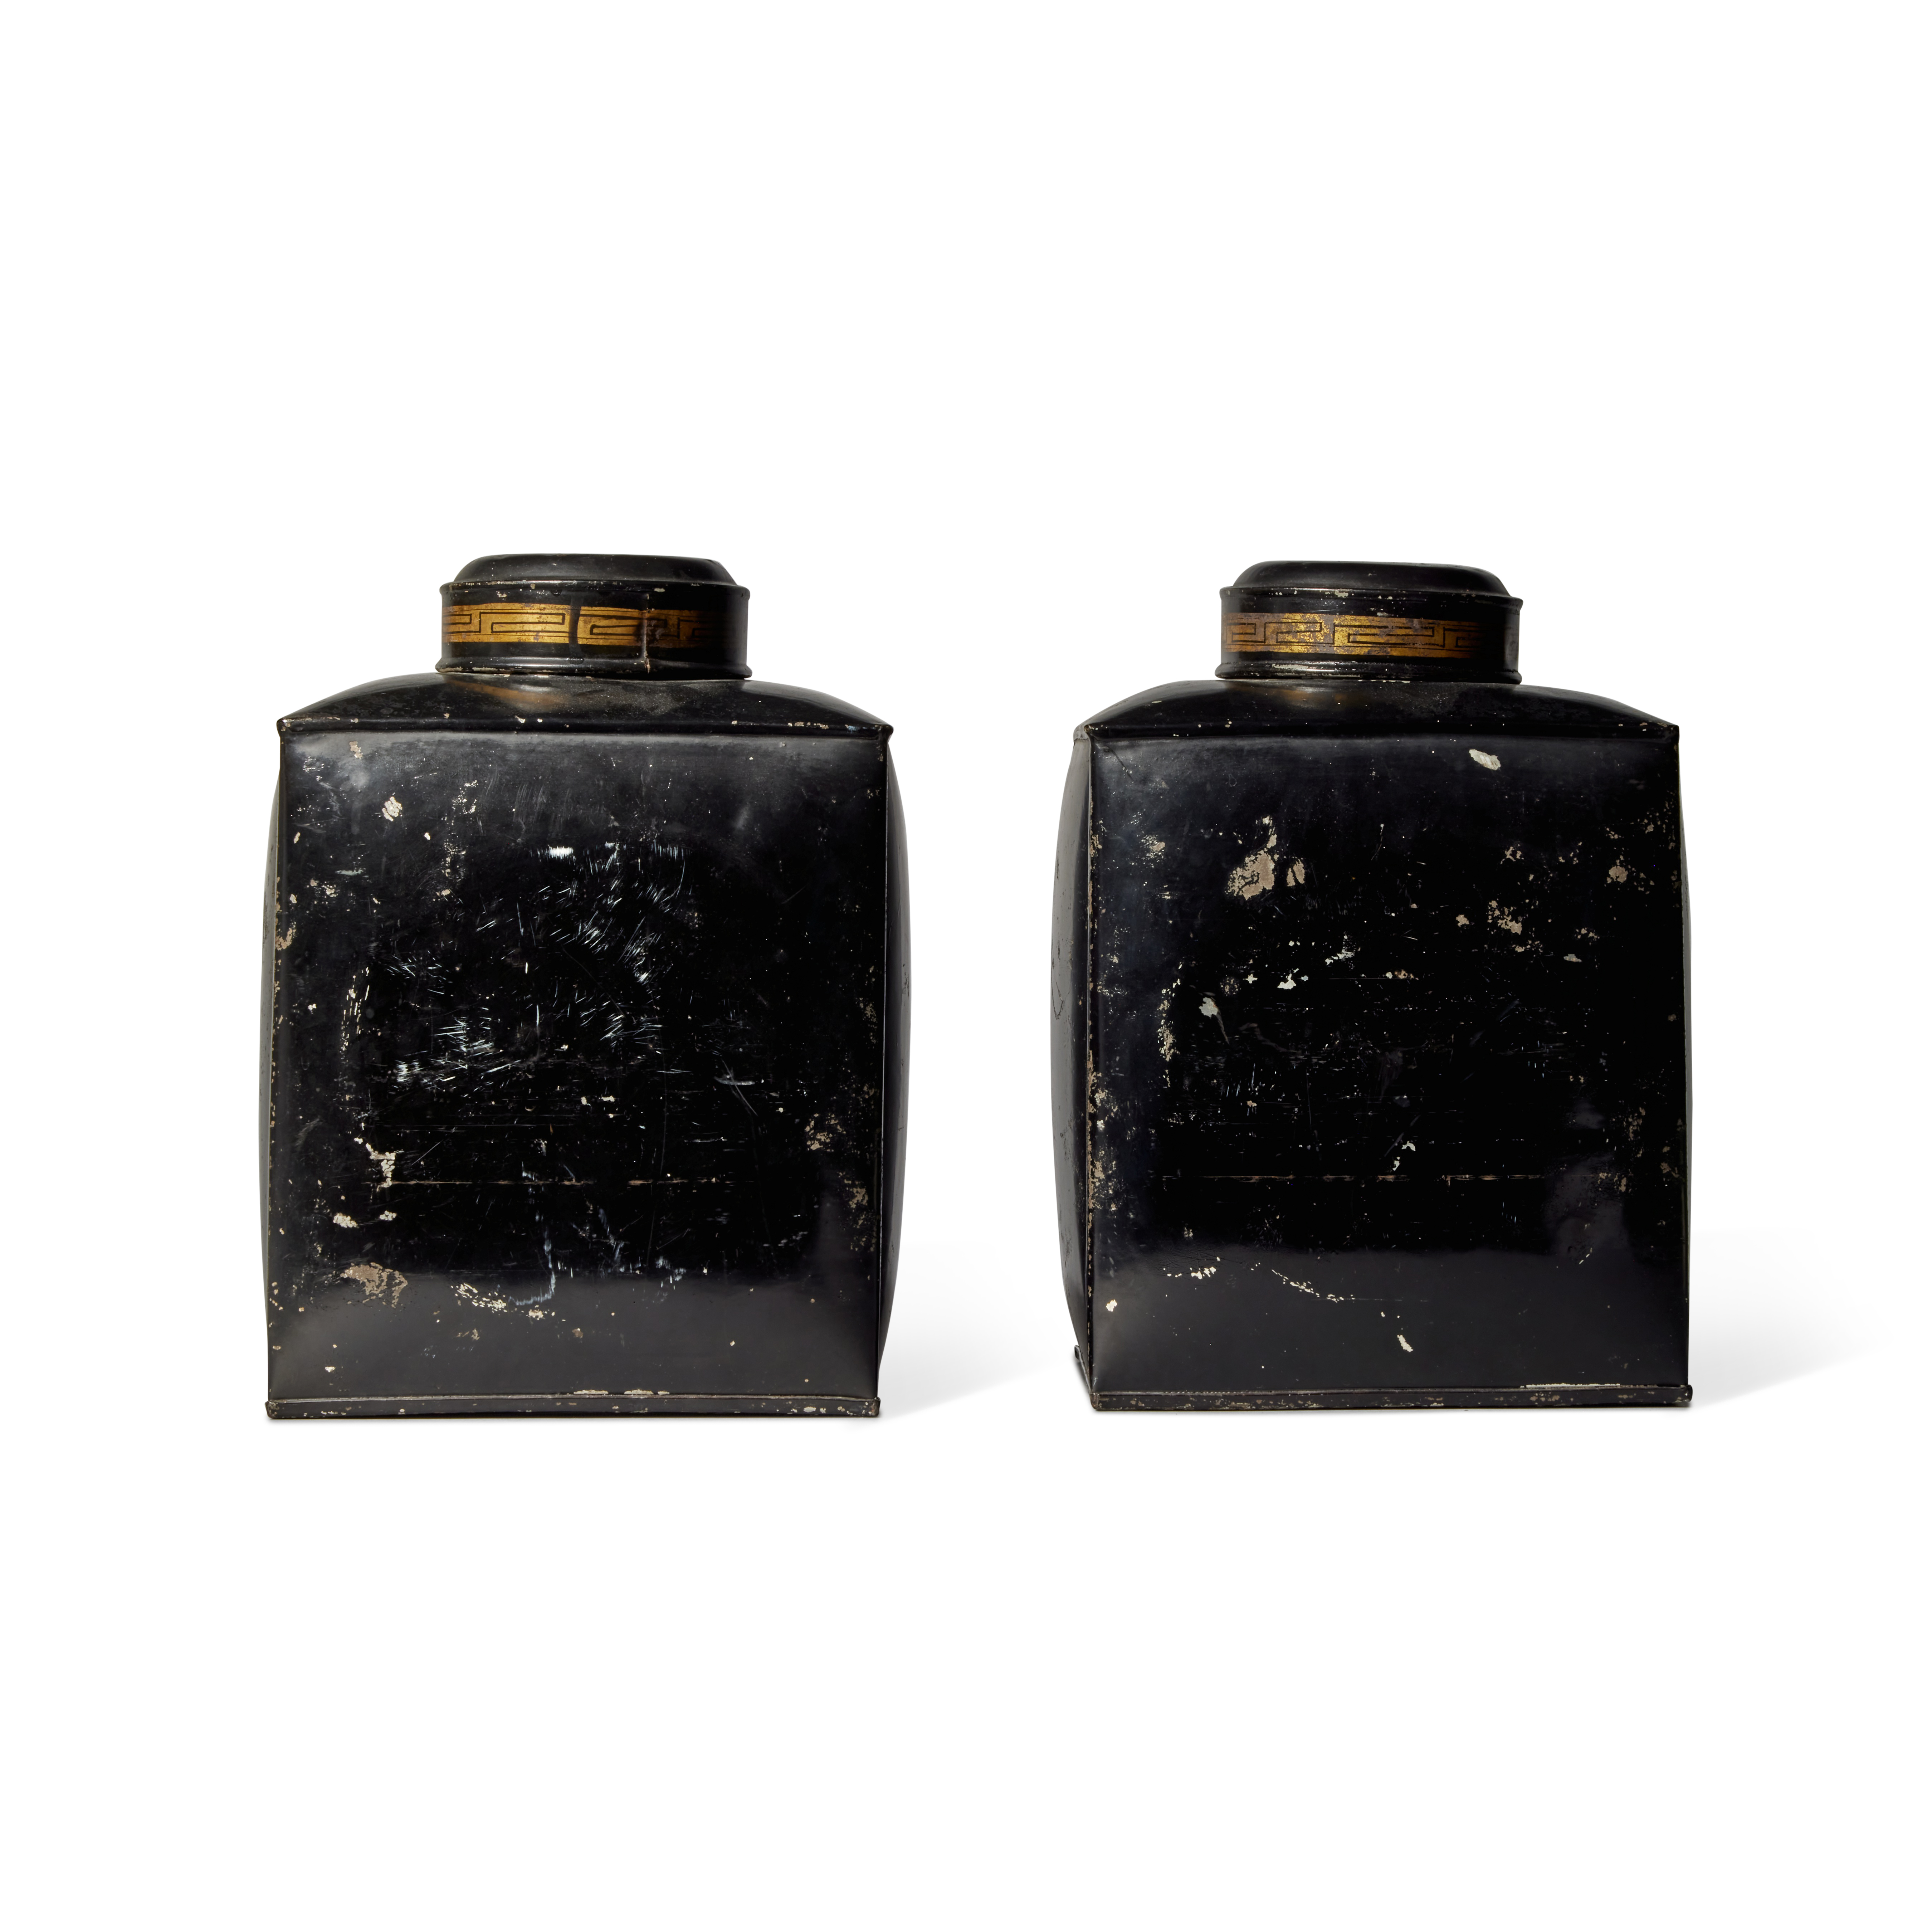 A Pair of Early Victorian Tôle Peinte Tea Canisters and Covers, Circa 1840 - Image 4 of 4